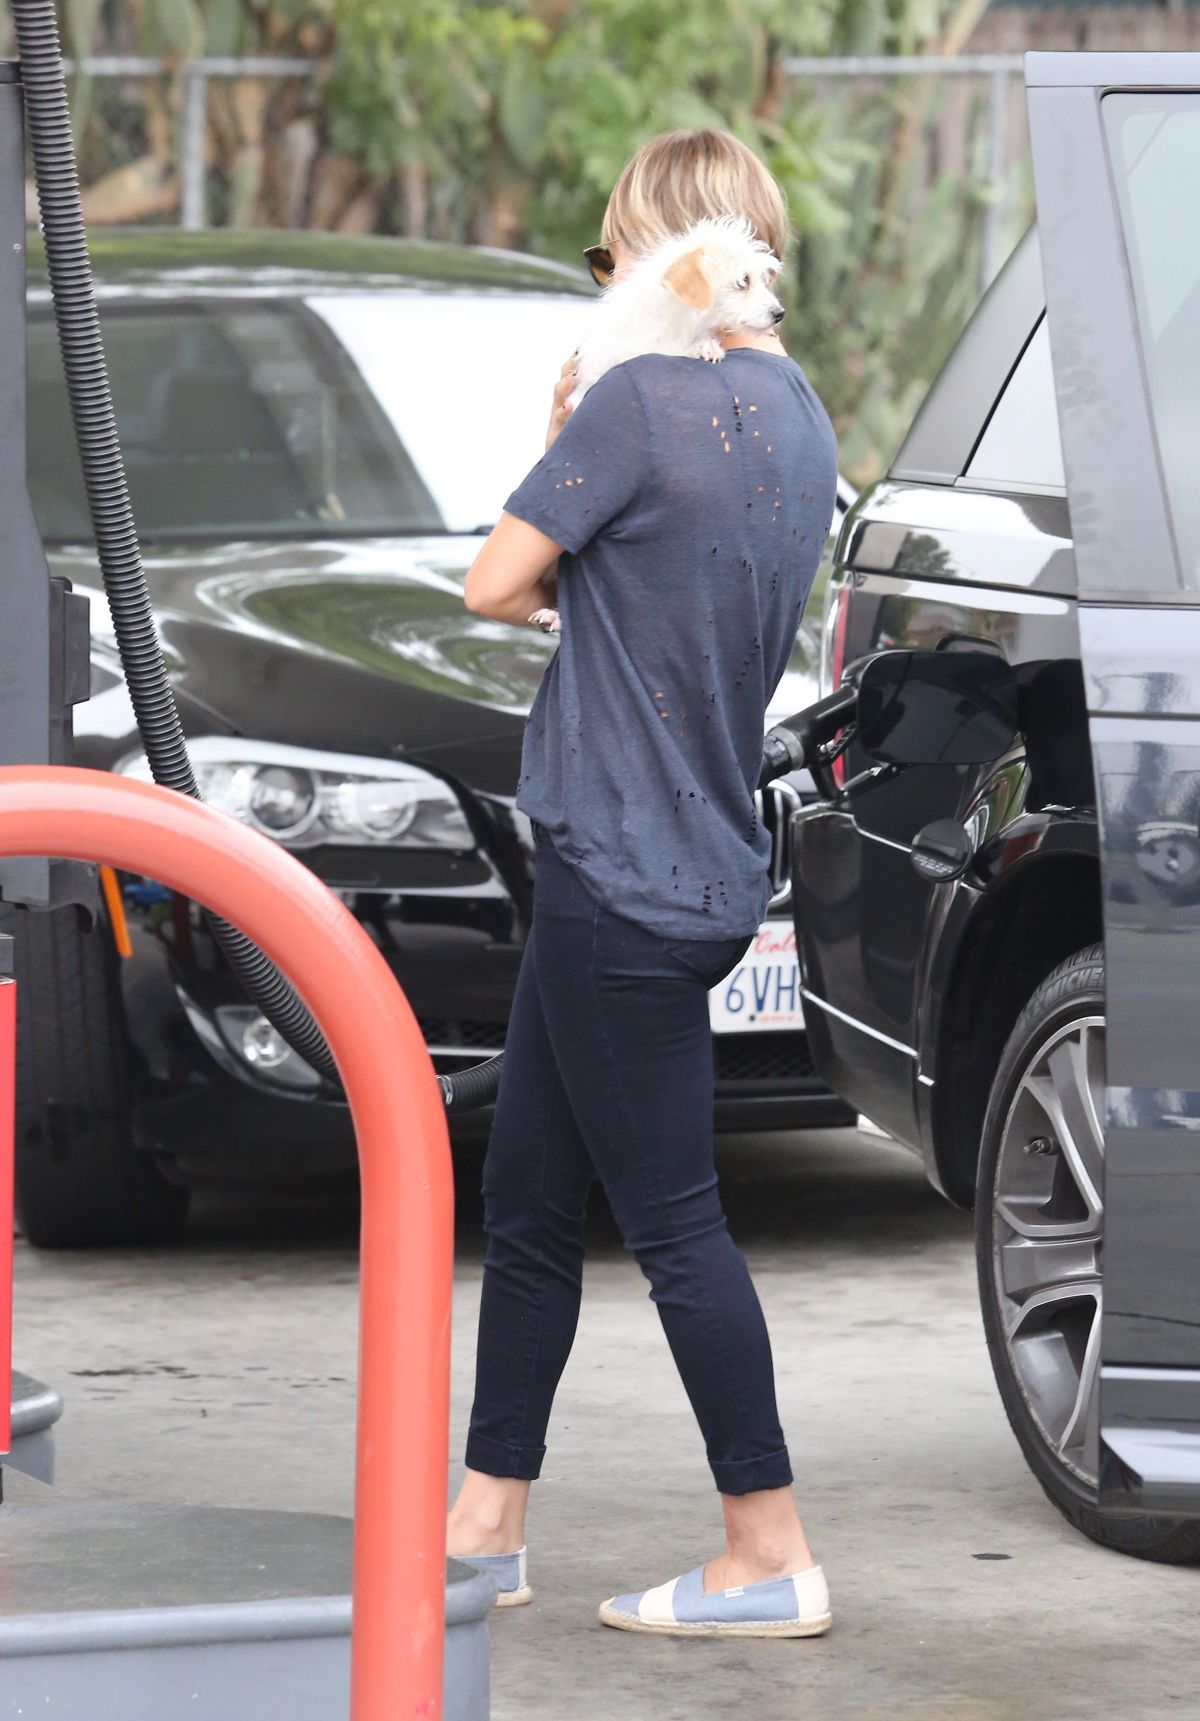 kaley-cuoco-in-jeans-out-and-about-in-los-angeles_3.